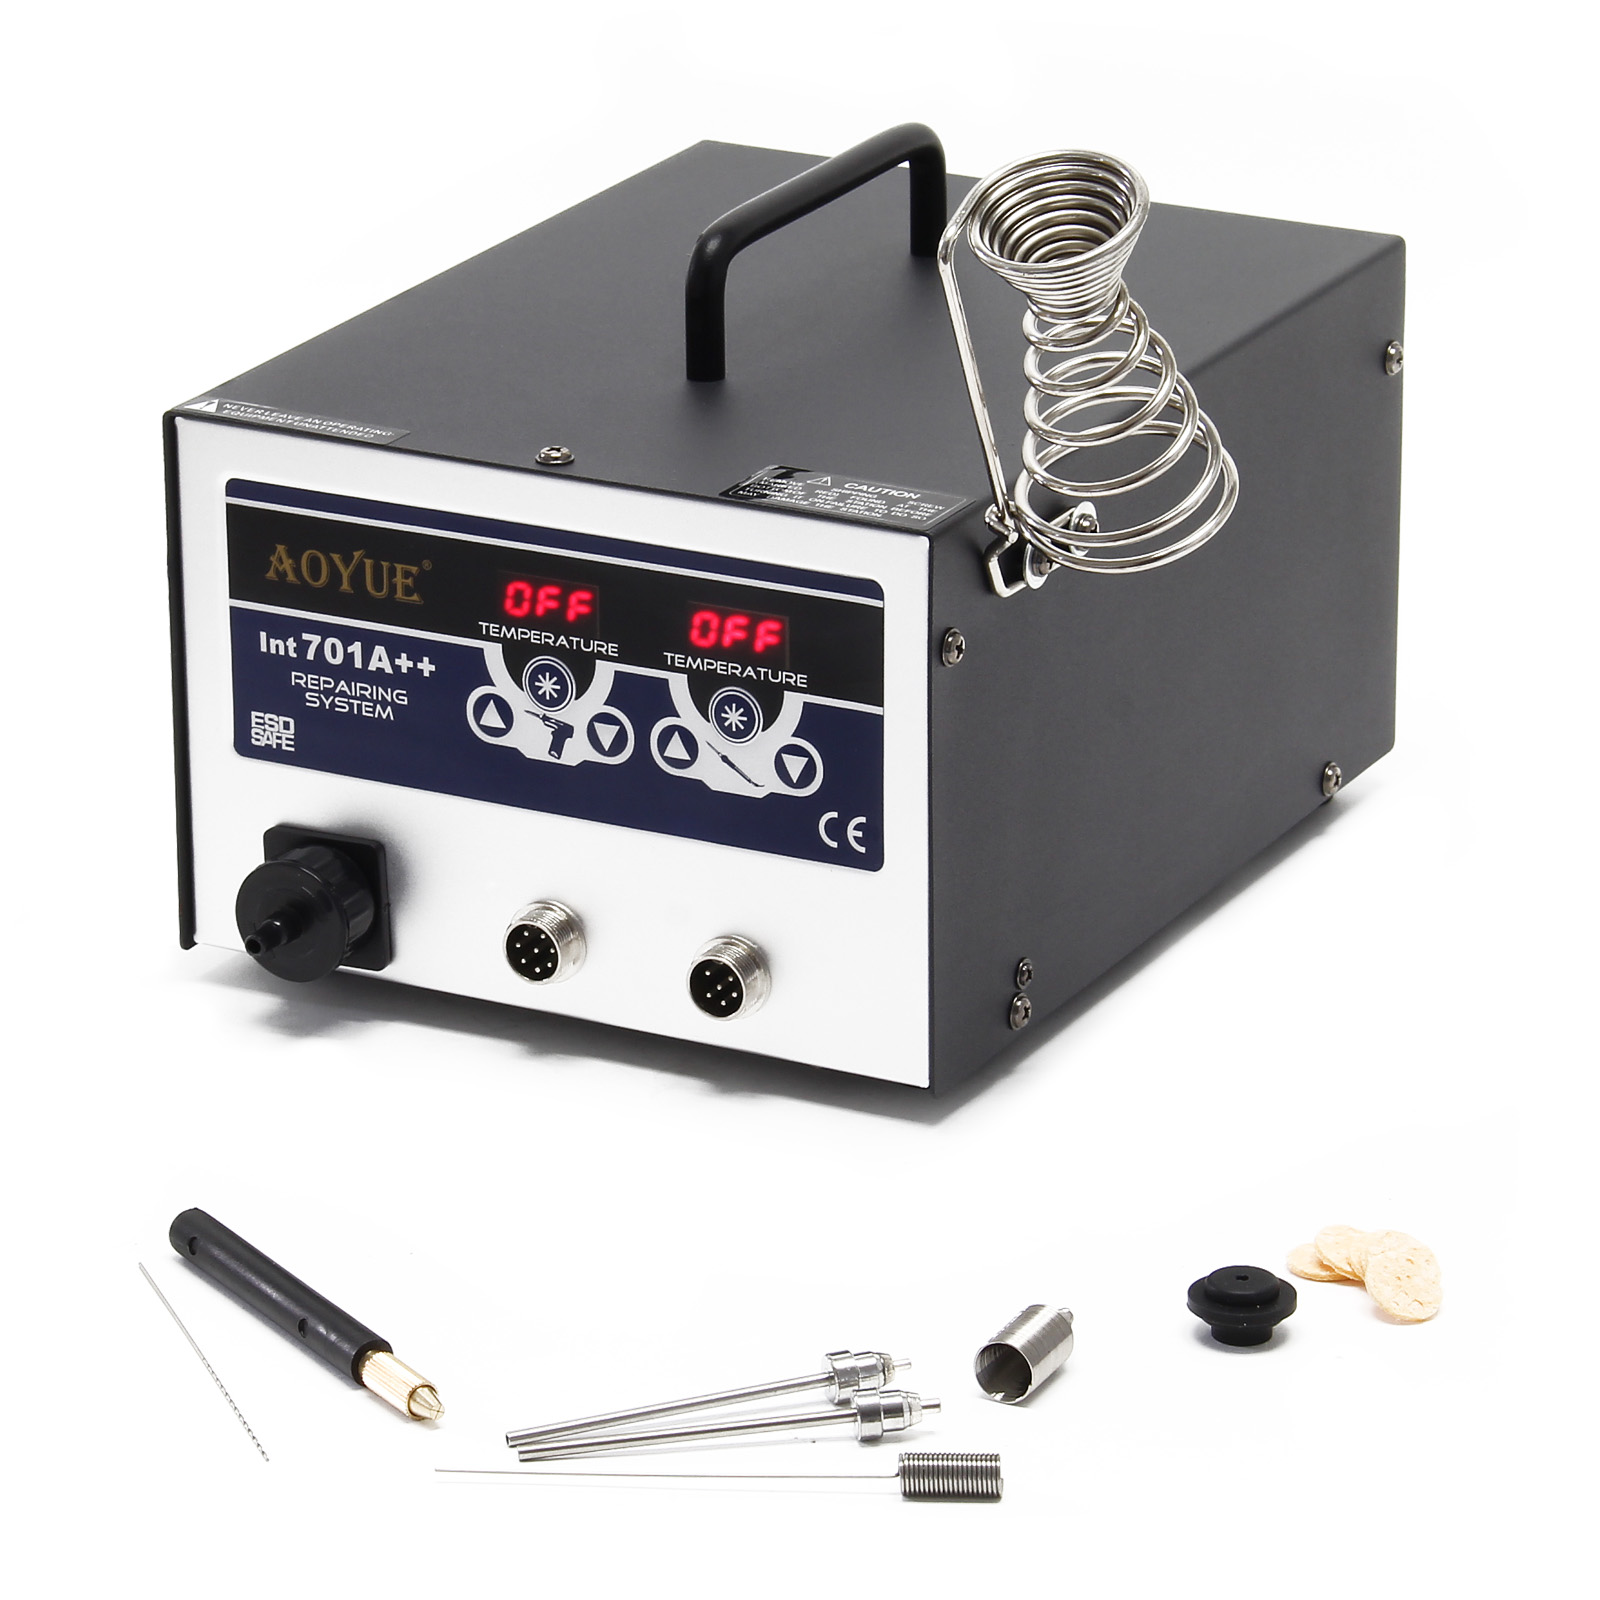 AOYUE Int701A++ Repairing-Station Desoldering Pump with Soldering Iron